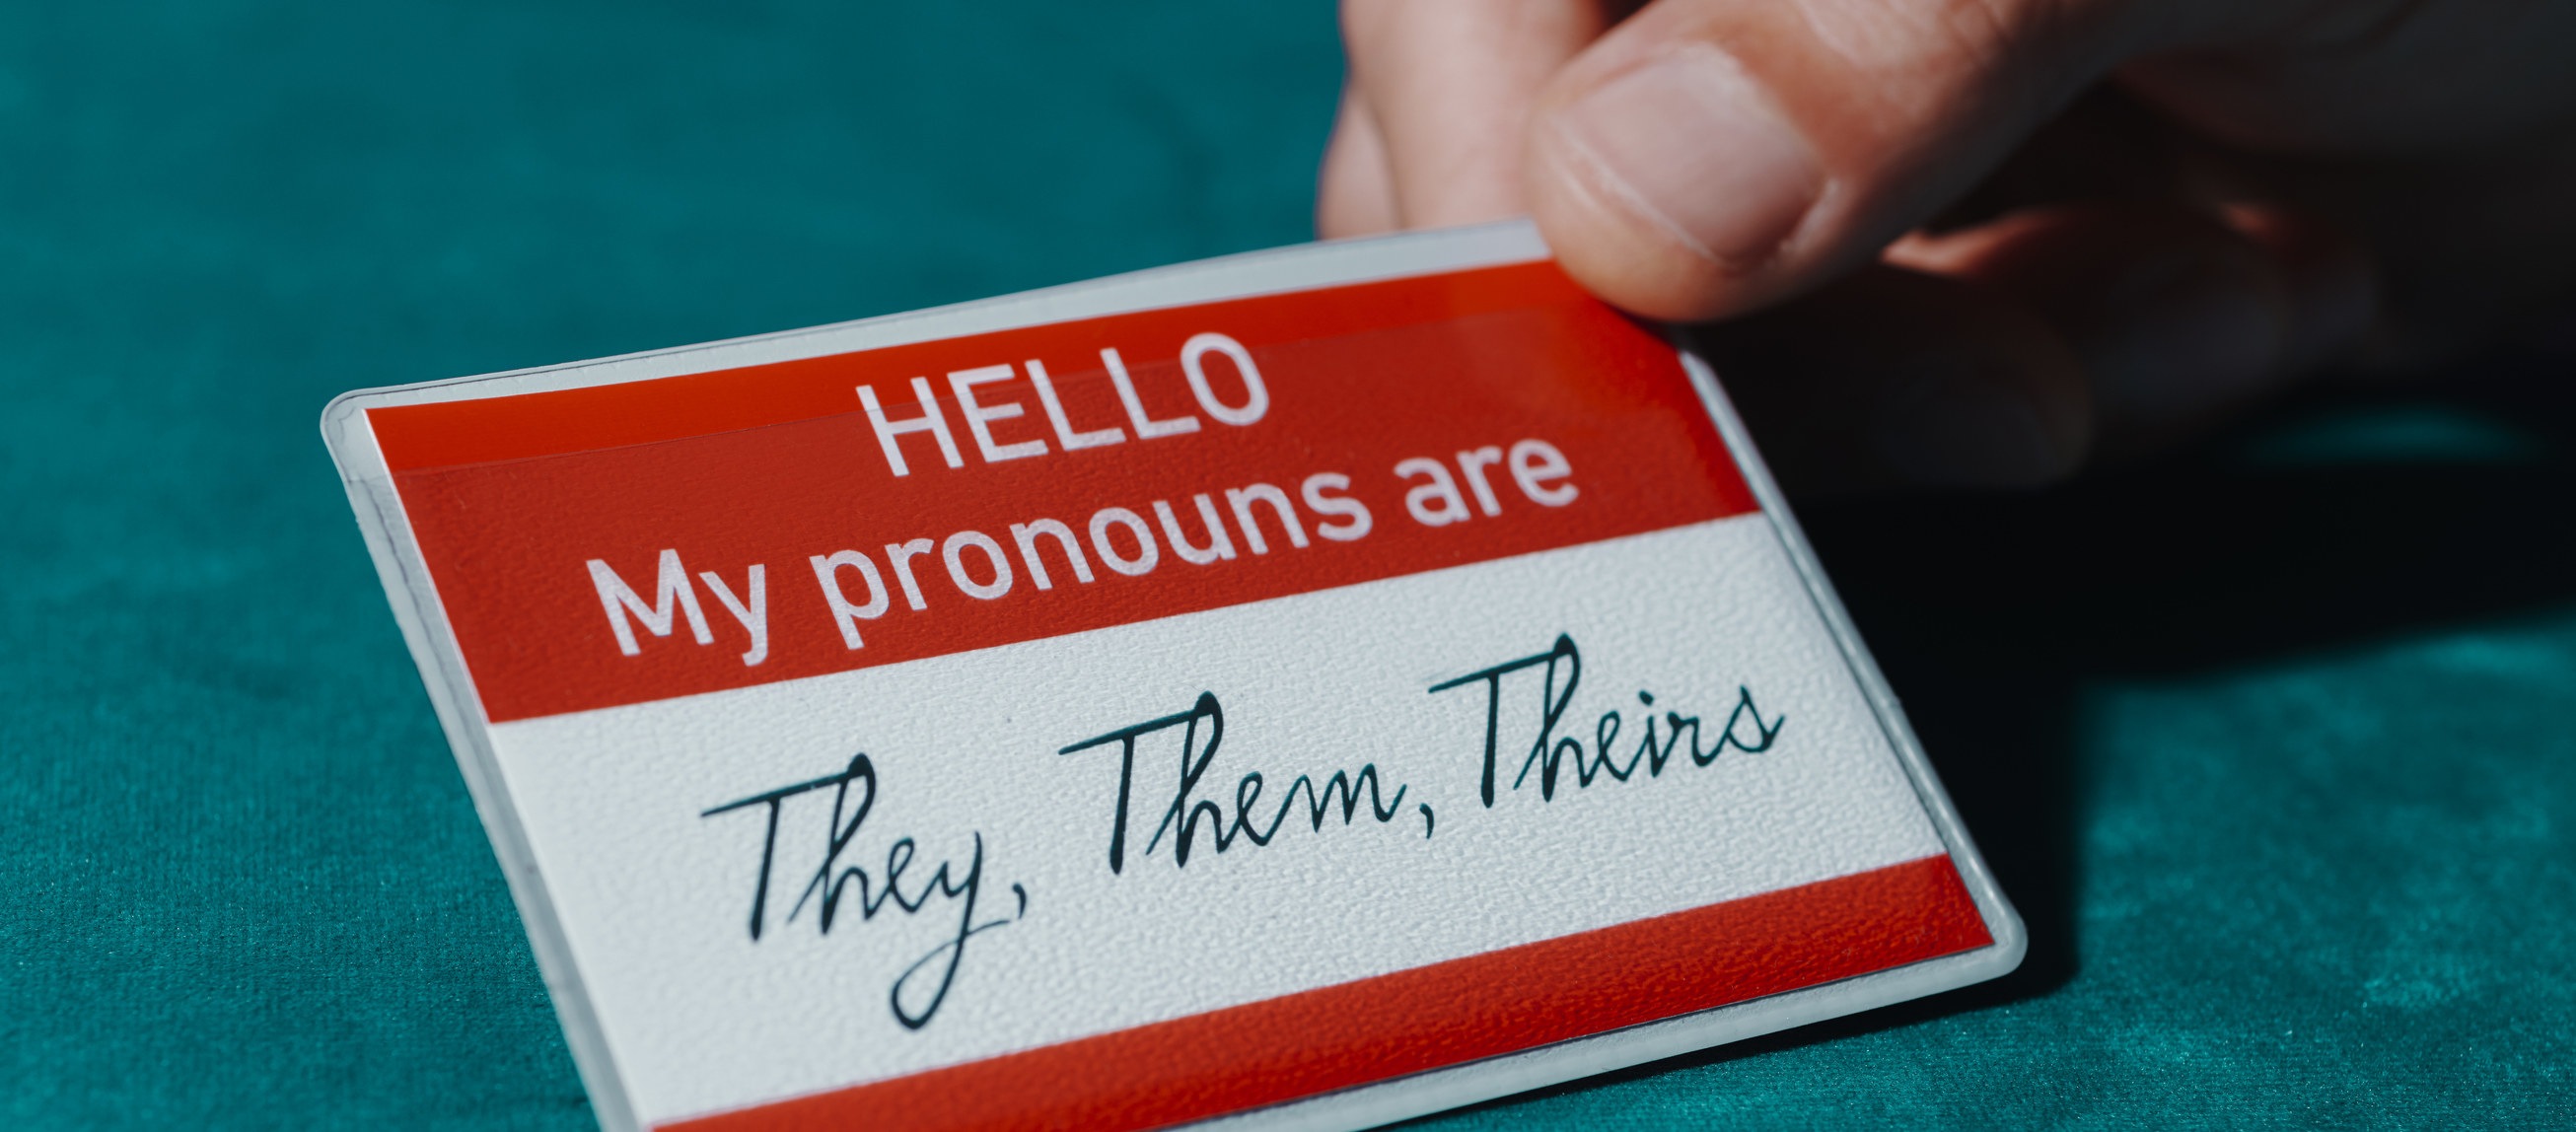 a name tag with they, them, theirs pronouns